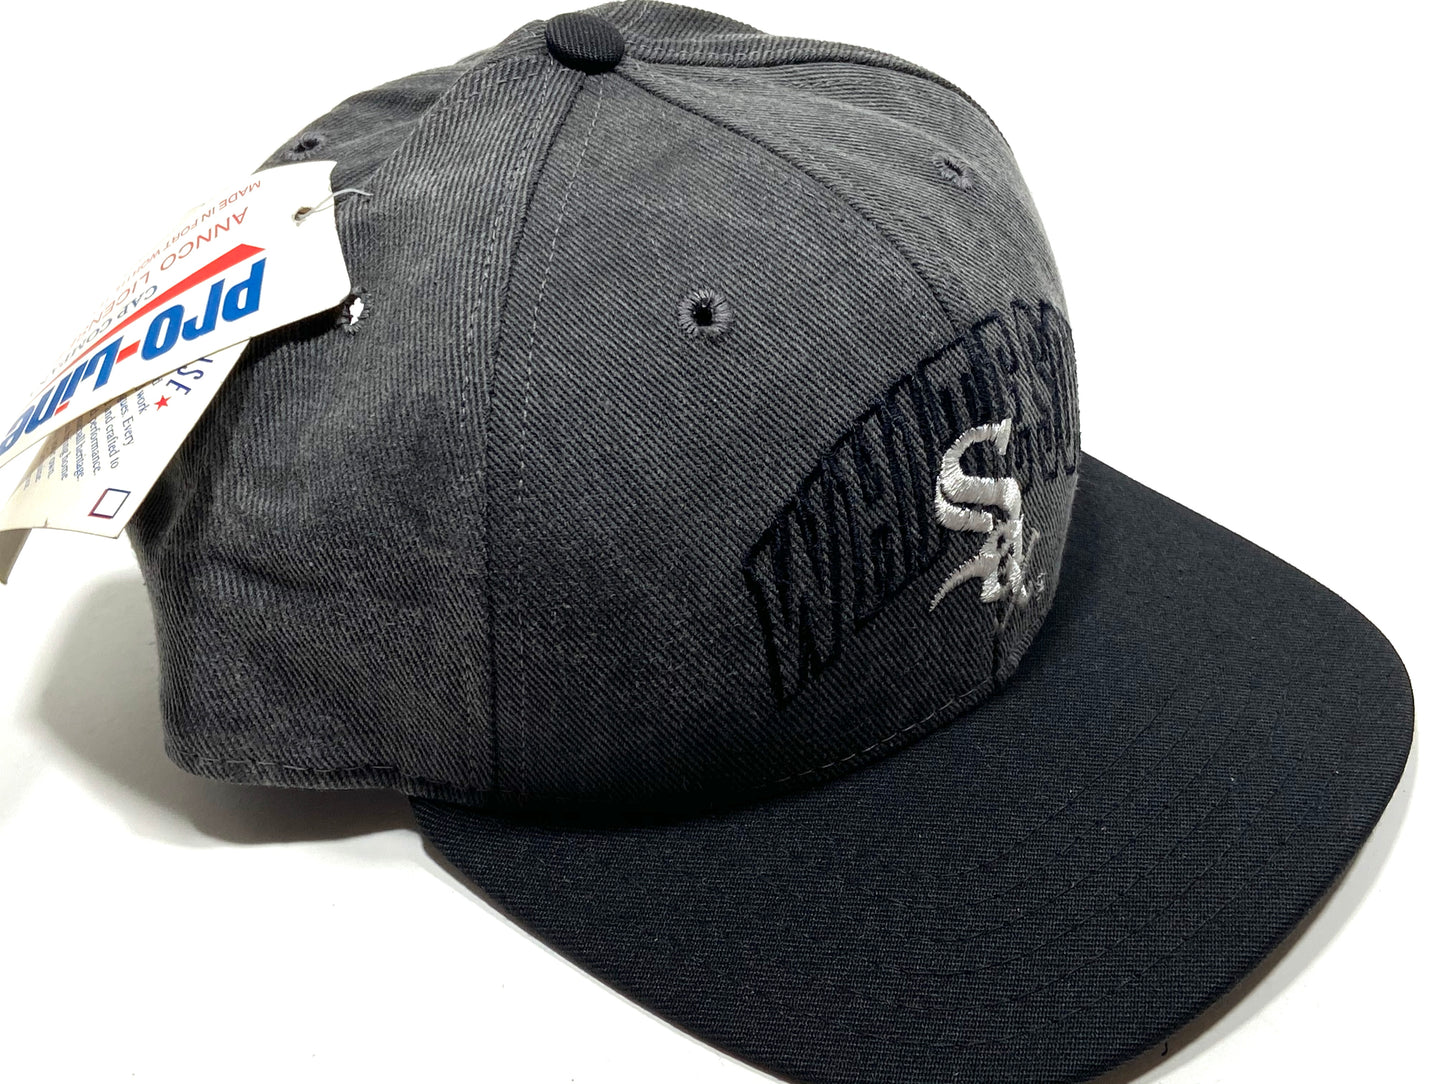 Chicago White Sox Vintage MLB Gray "Sox" Snapback by Pro-Line (Annco)